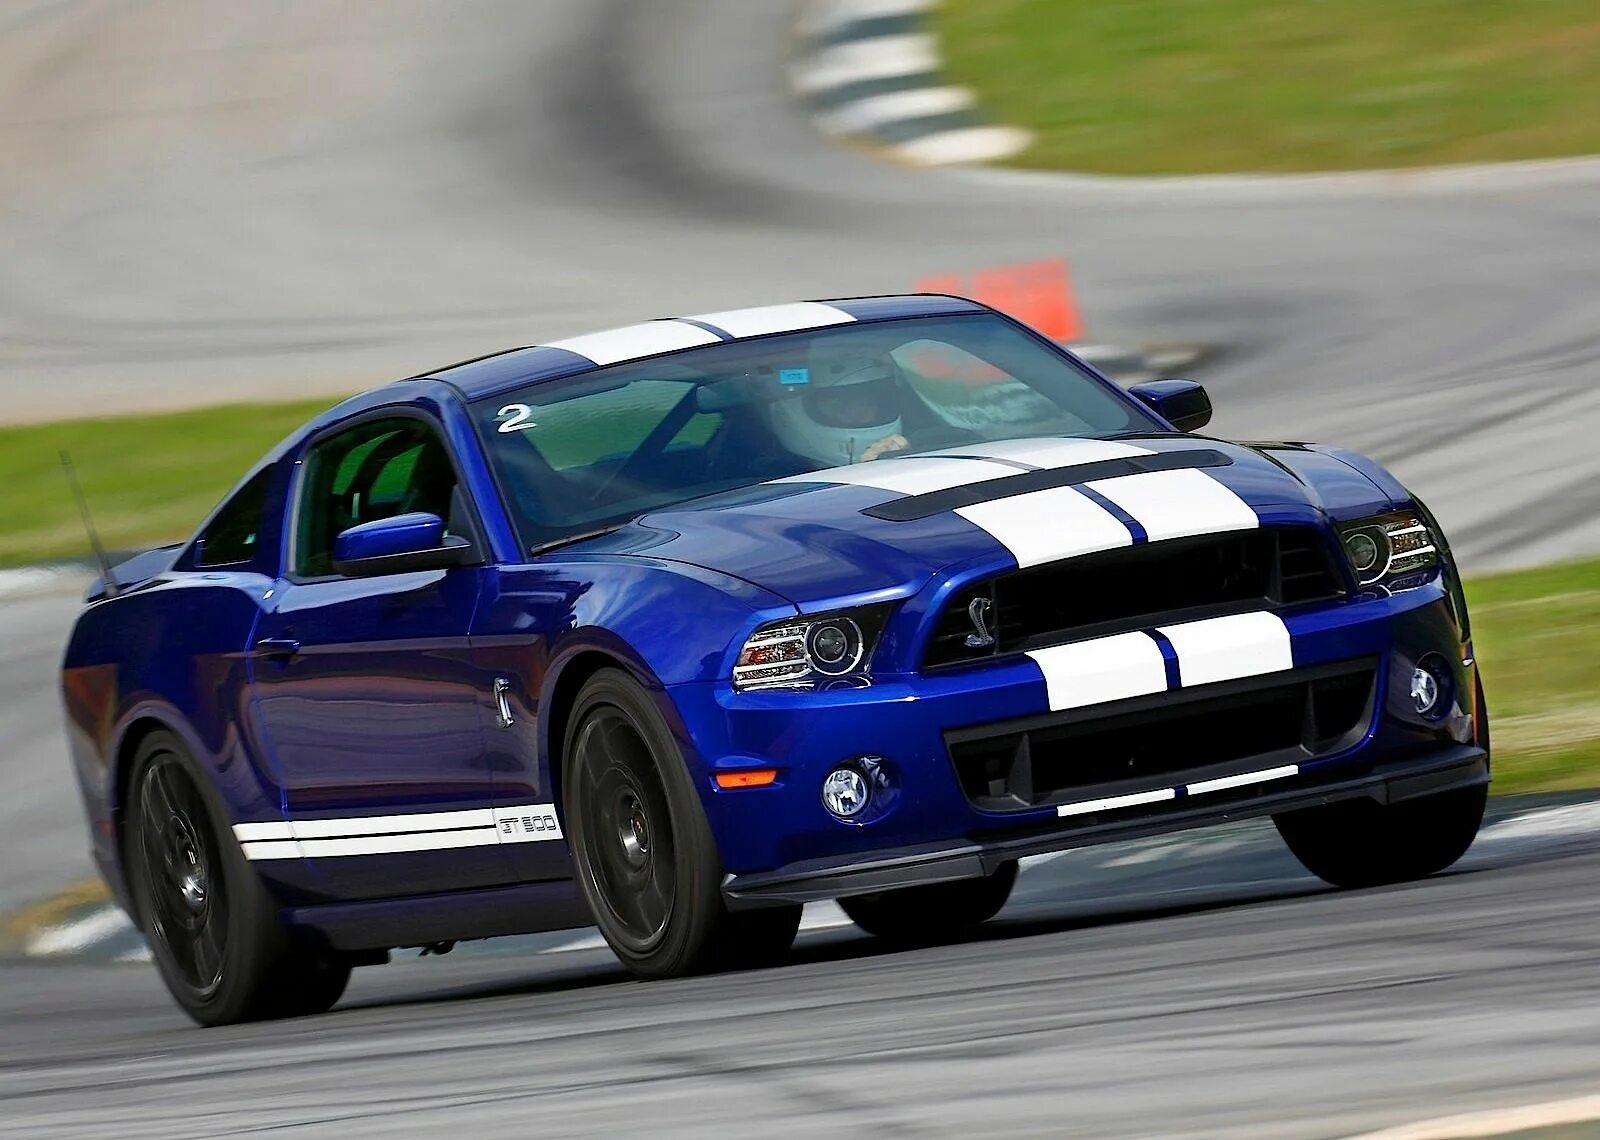 Мустанг джити. Форд Мустанг gt 500 Shelby. Ford Shelby gt500. Ford Mustang gt500. Ford Mustang Shelby gt500 2011.